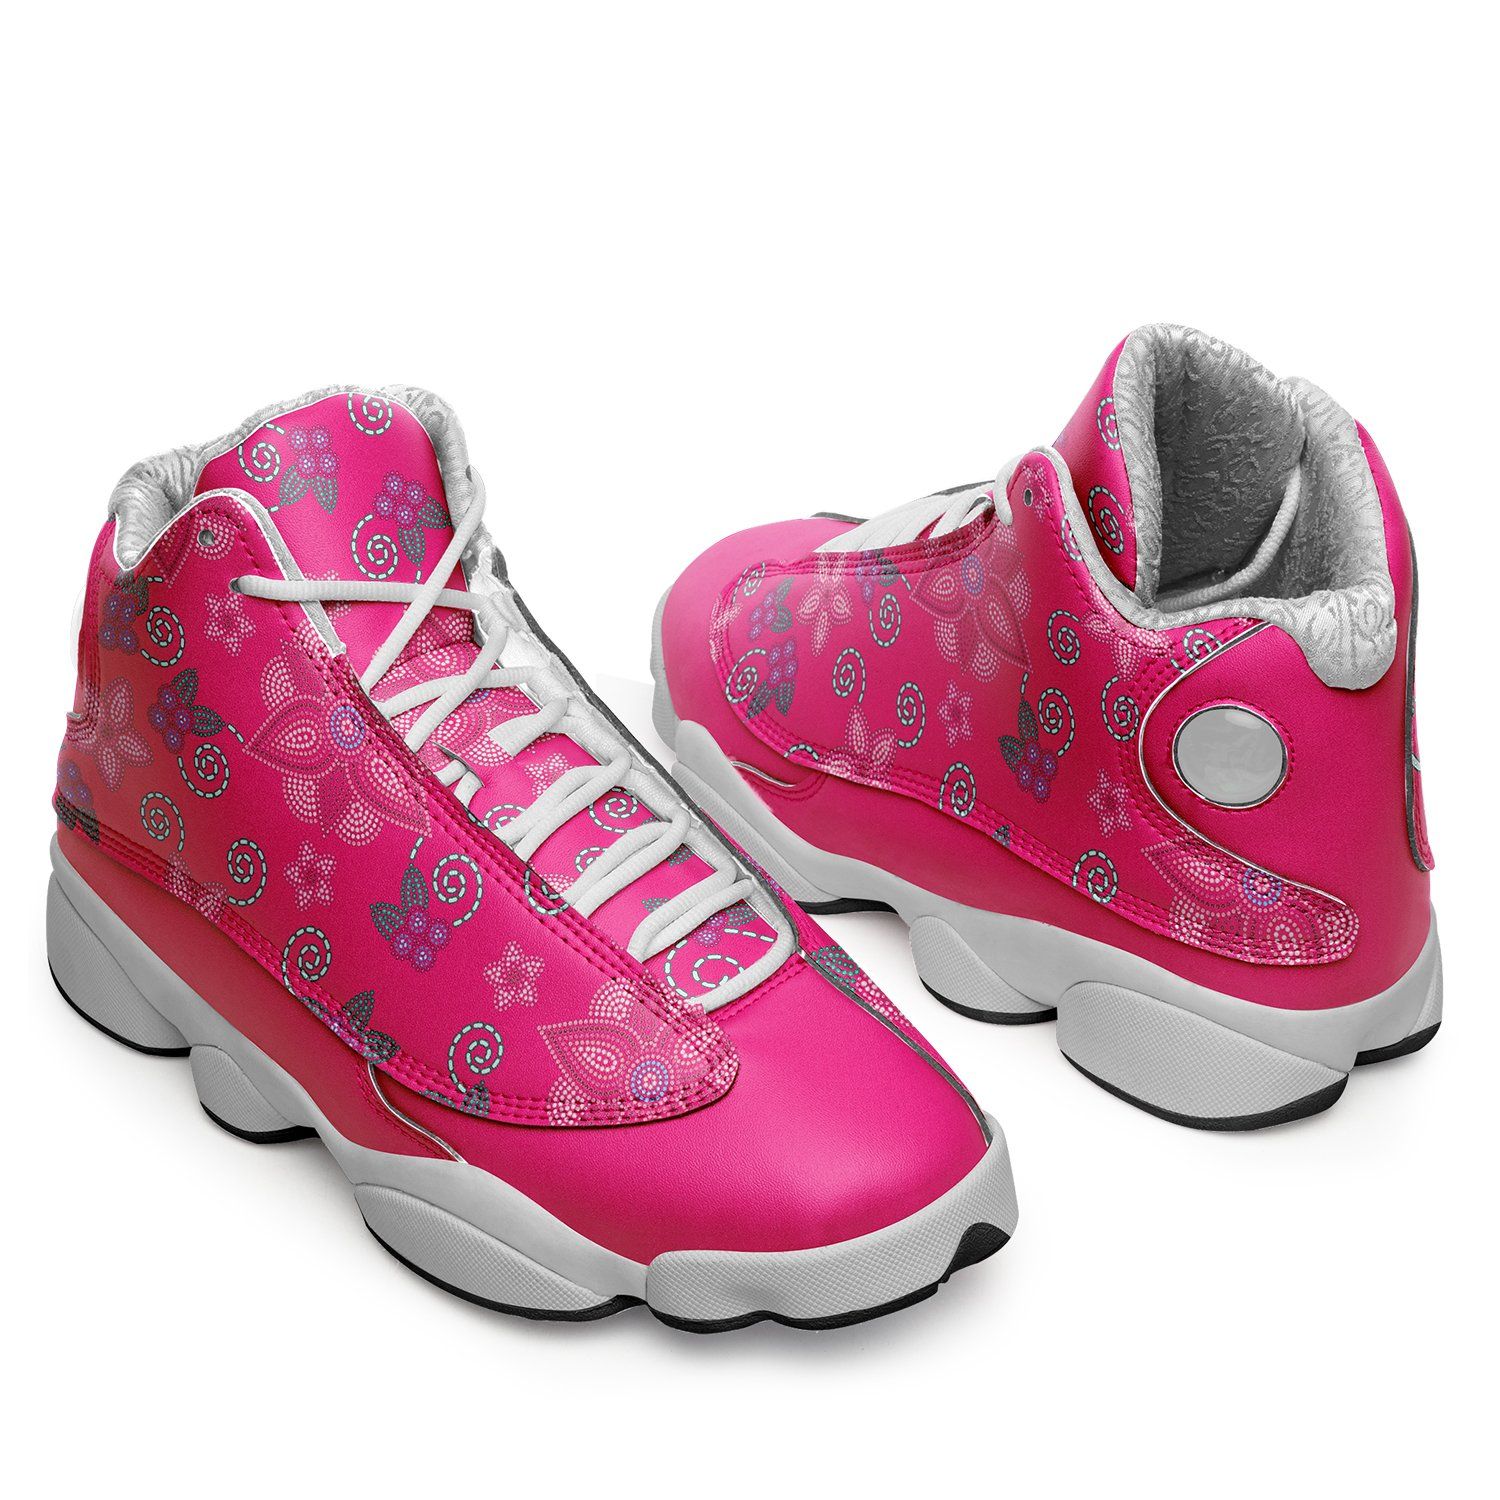 Berry Picking Pink Isstsokini Athletic Shoes Herman 